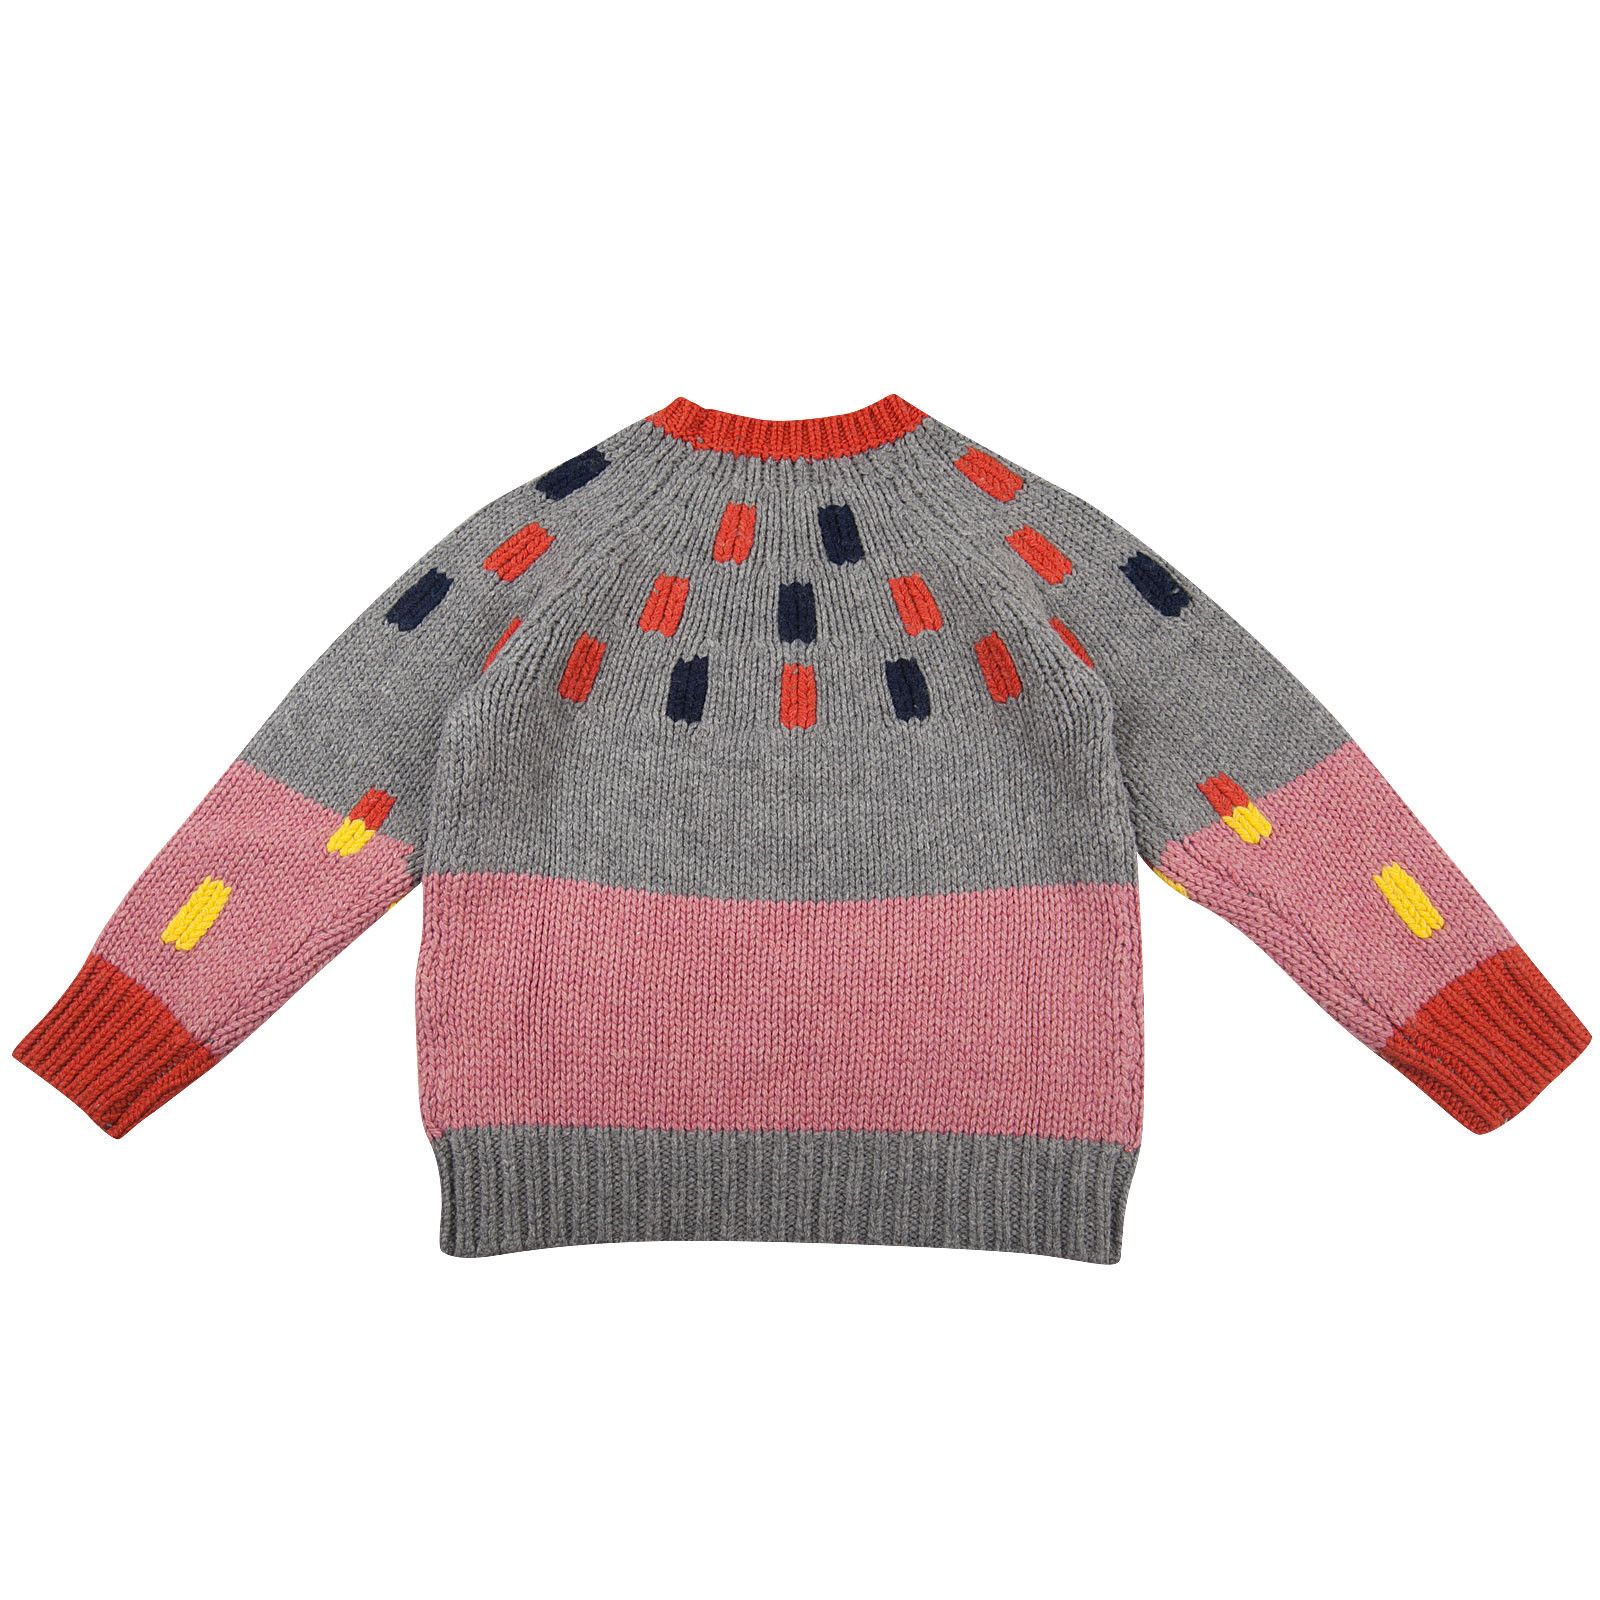 Freddie Girls Grey&Red Wool Sweater With Red And Blue Trims - CÉMAROSE | Children's Fashion Store - 2